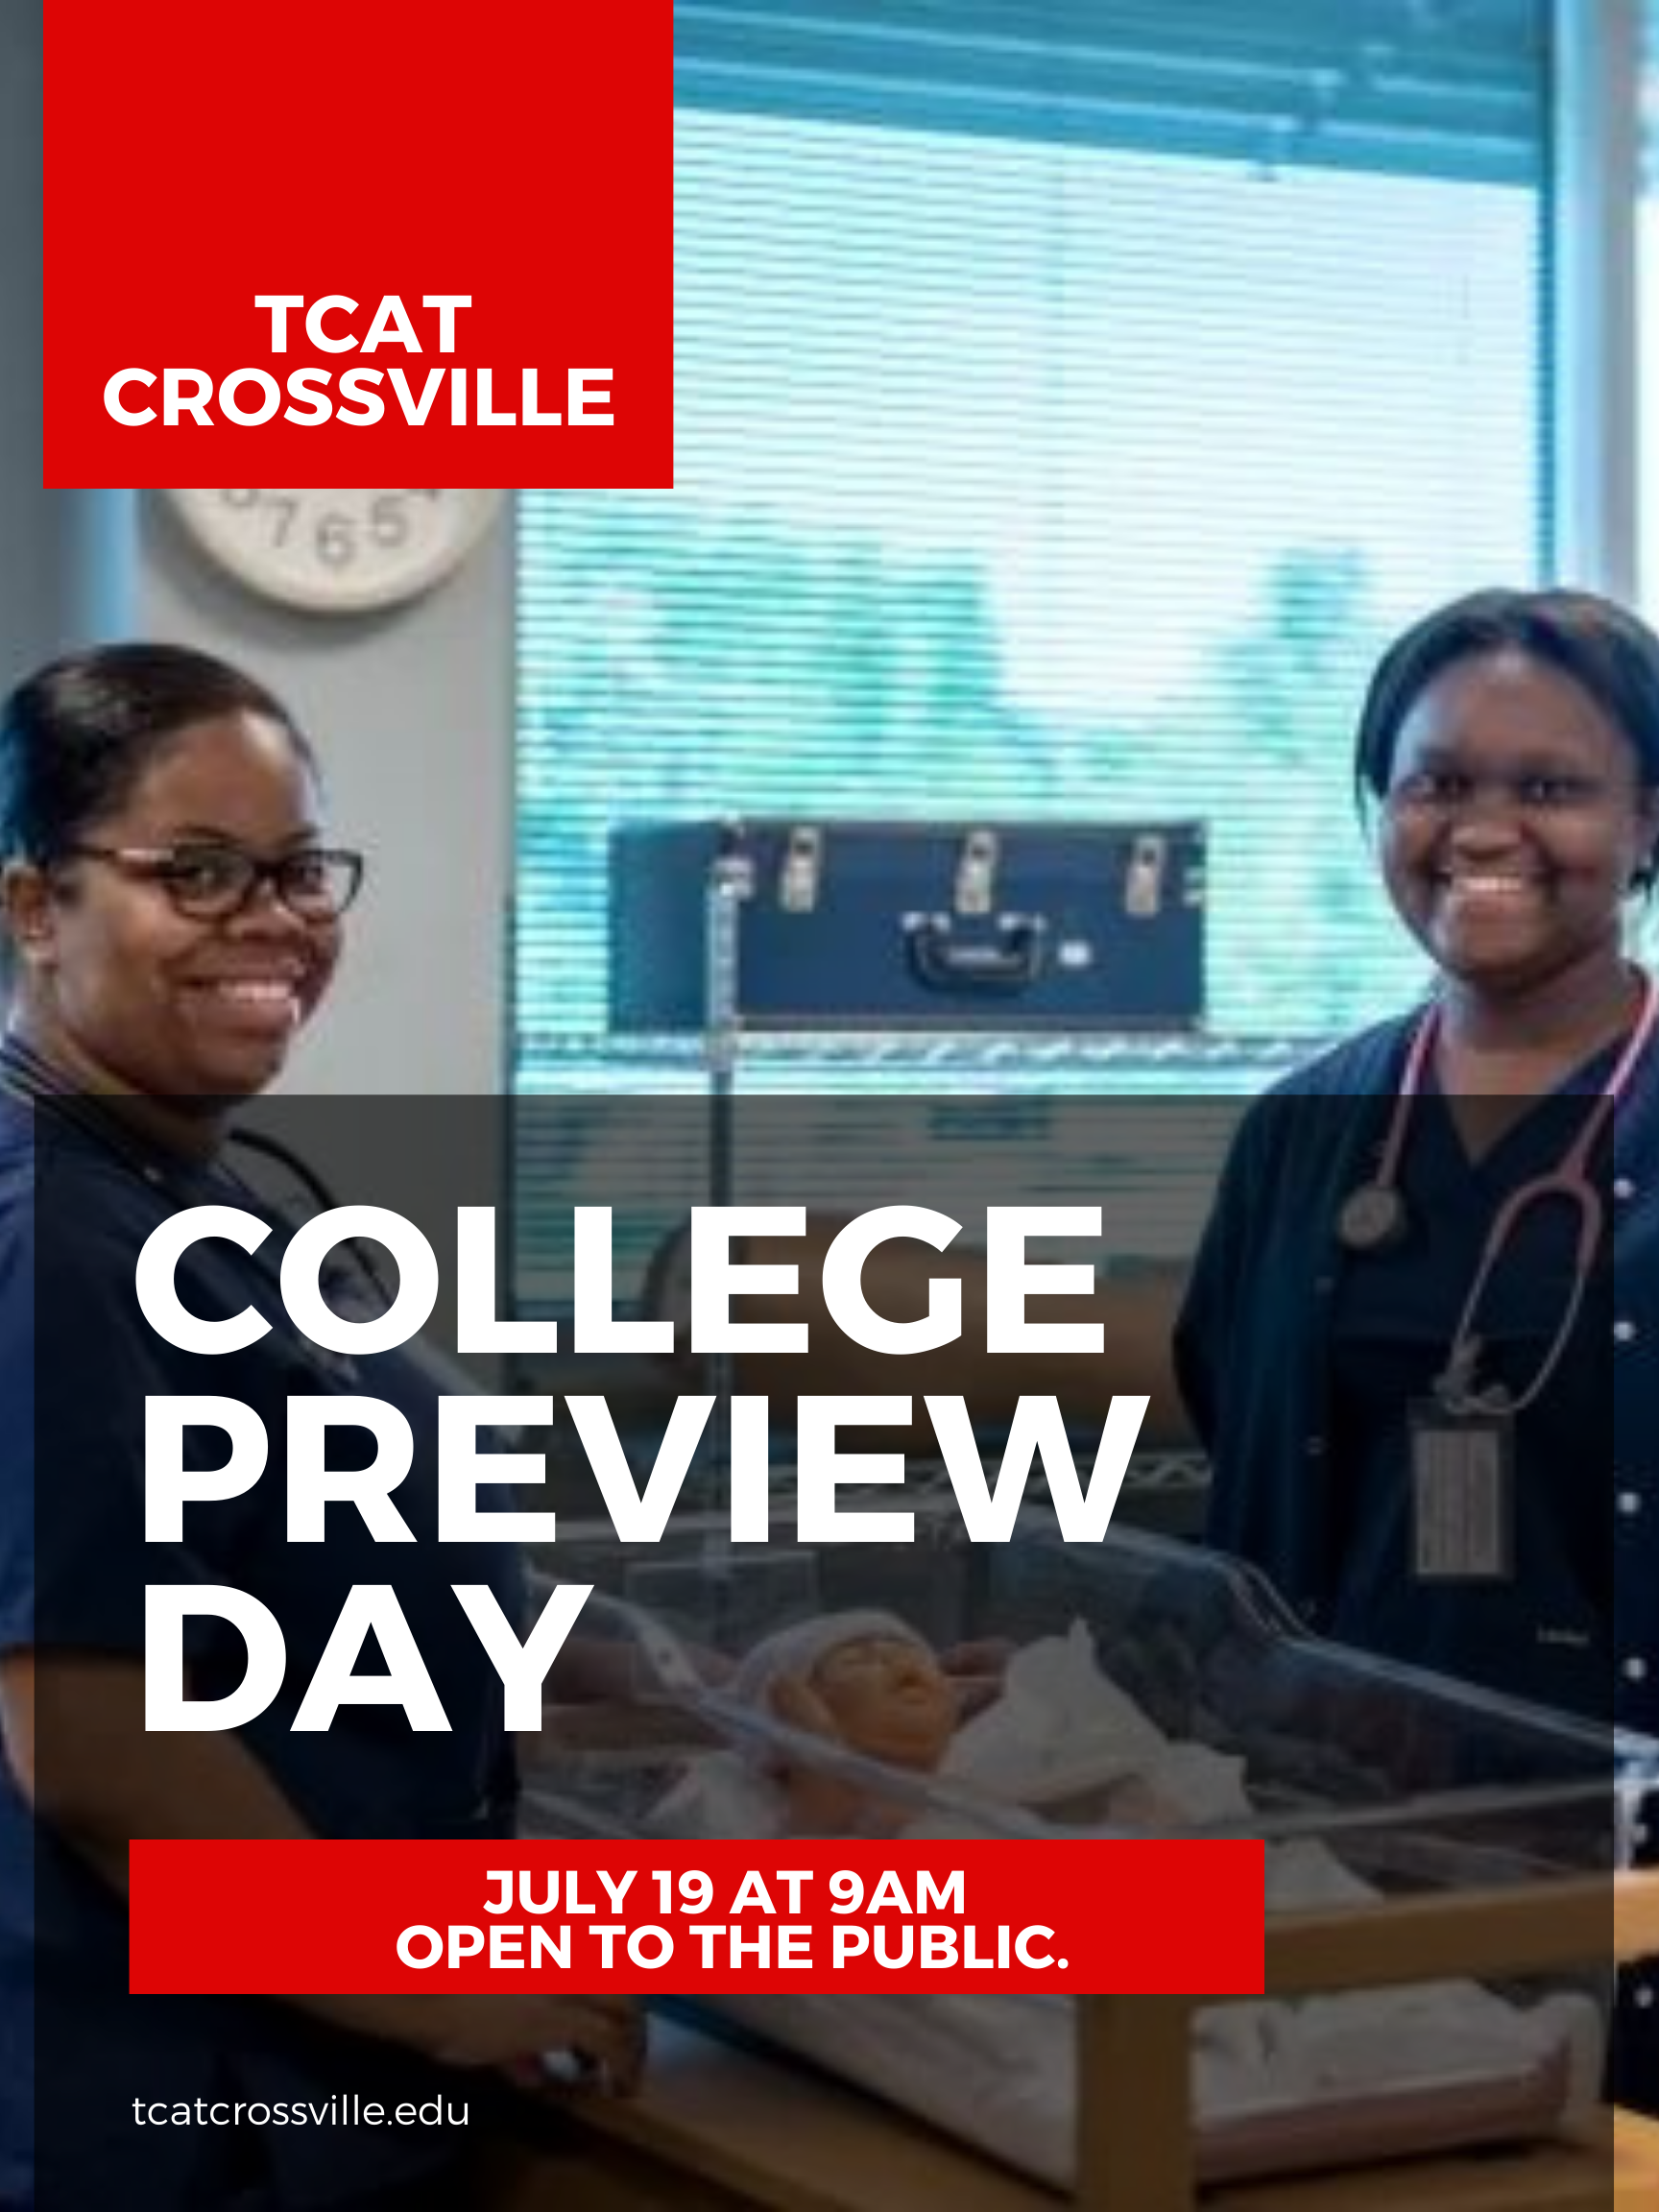 College Preview Day TCAT Crossville July 19 at 9am